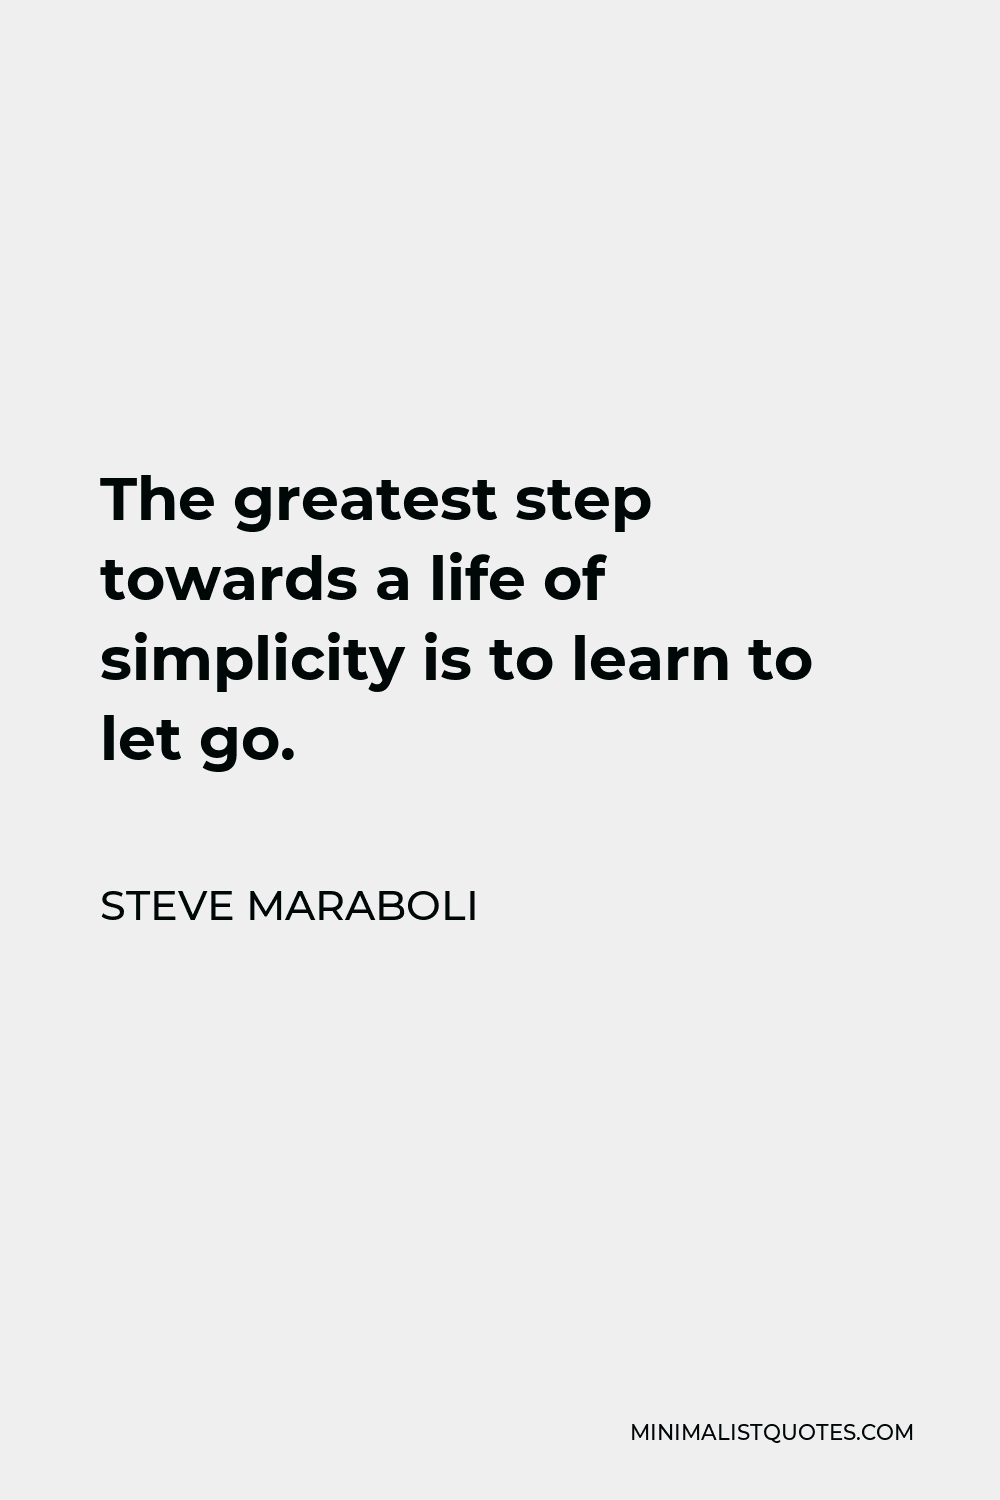 Steve Maraboli Quote - The greatest step towards a life of simplicity is to learn to let go.